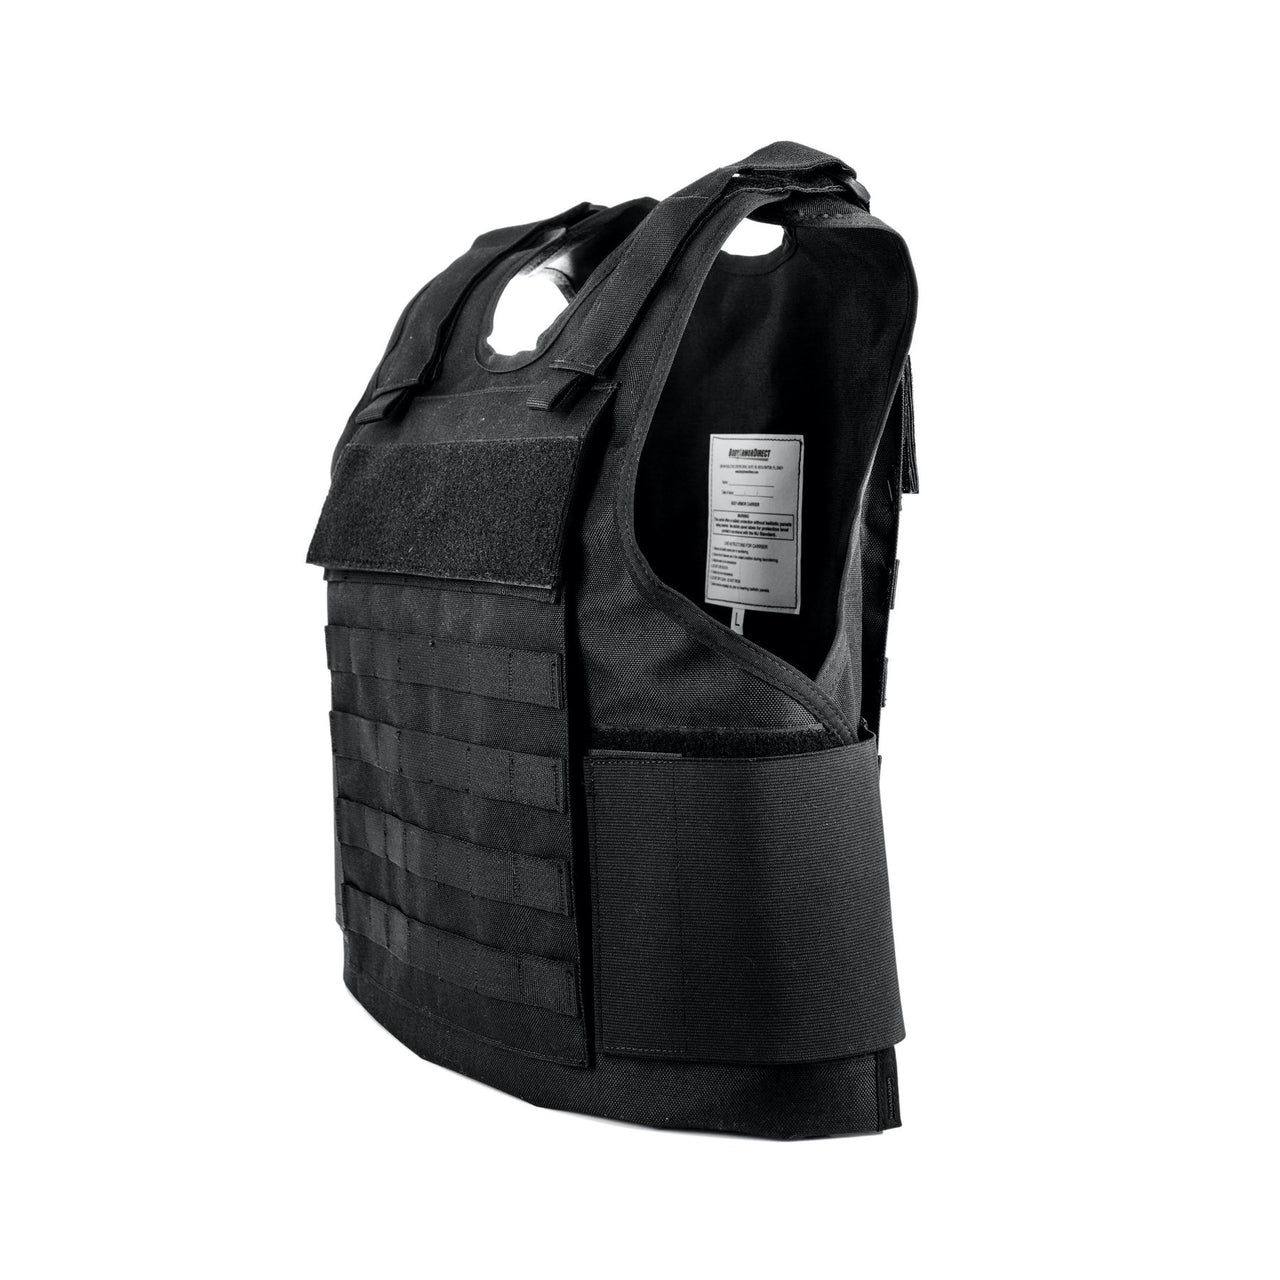 A Body Armor Direct All Star Tactical Outer Carrier on a white background.